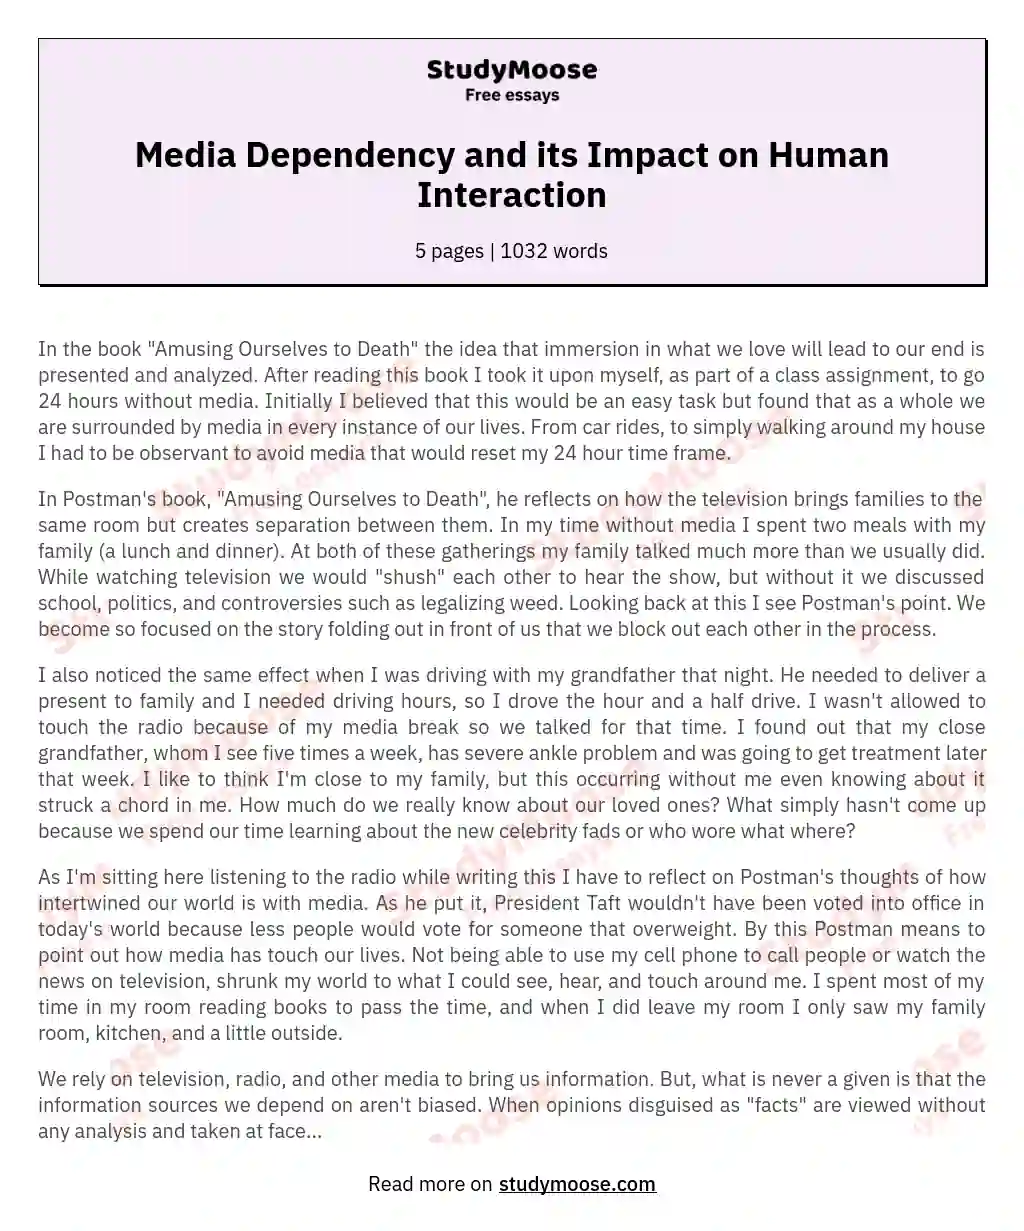 Media Dependency and its Impact on Human Interaction essay